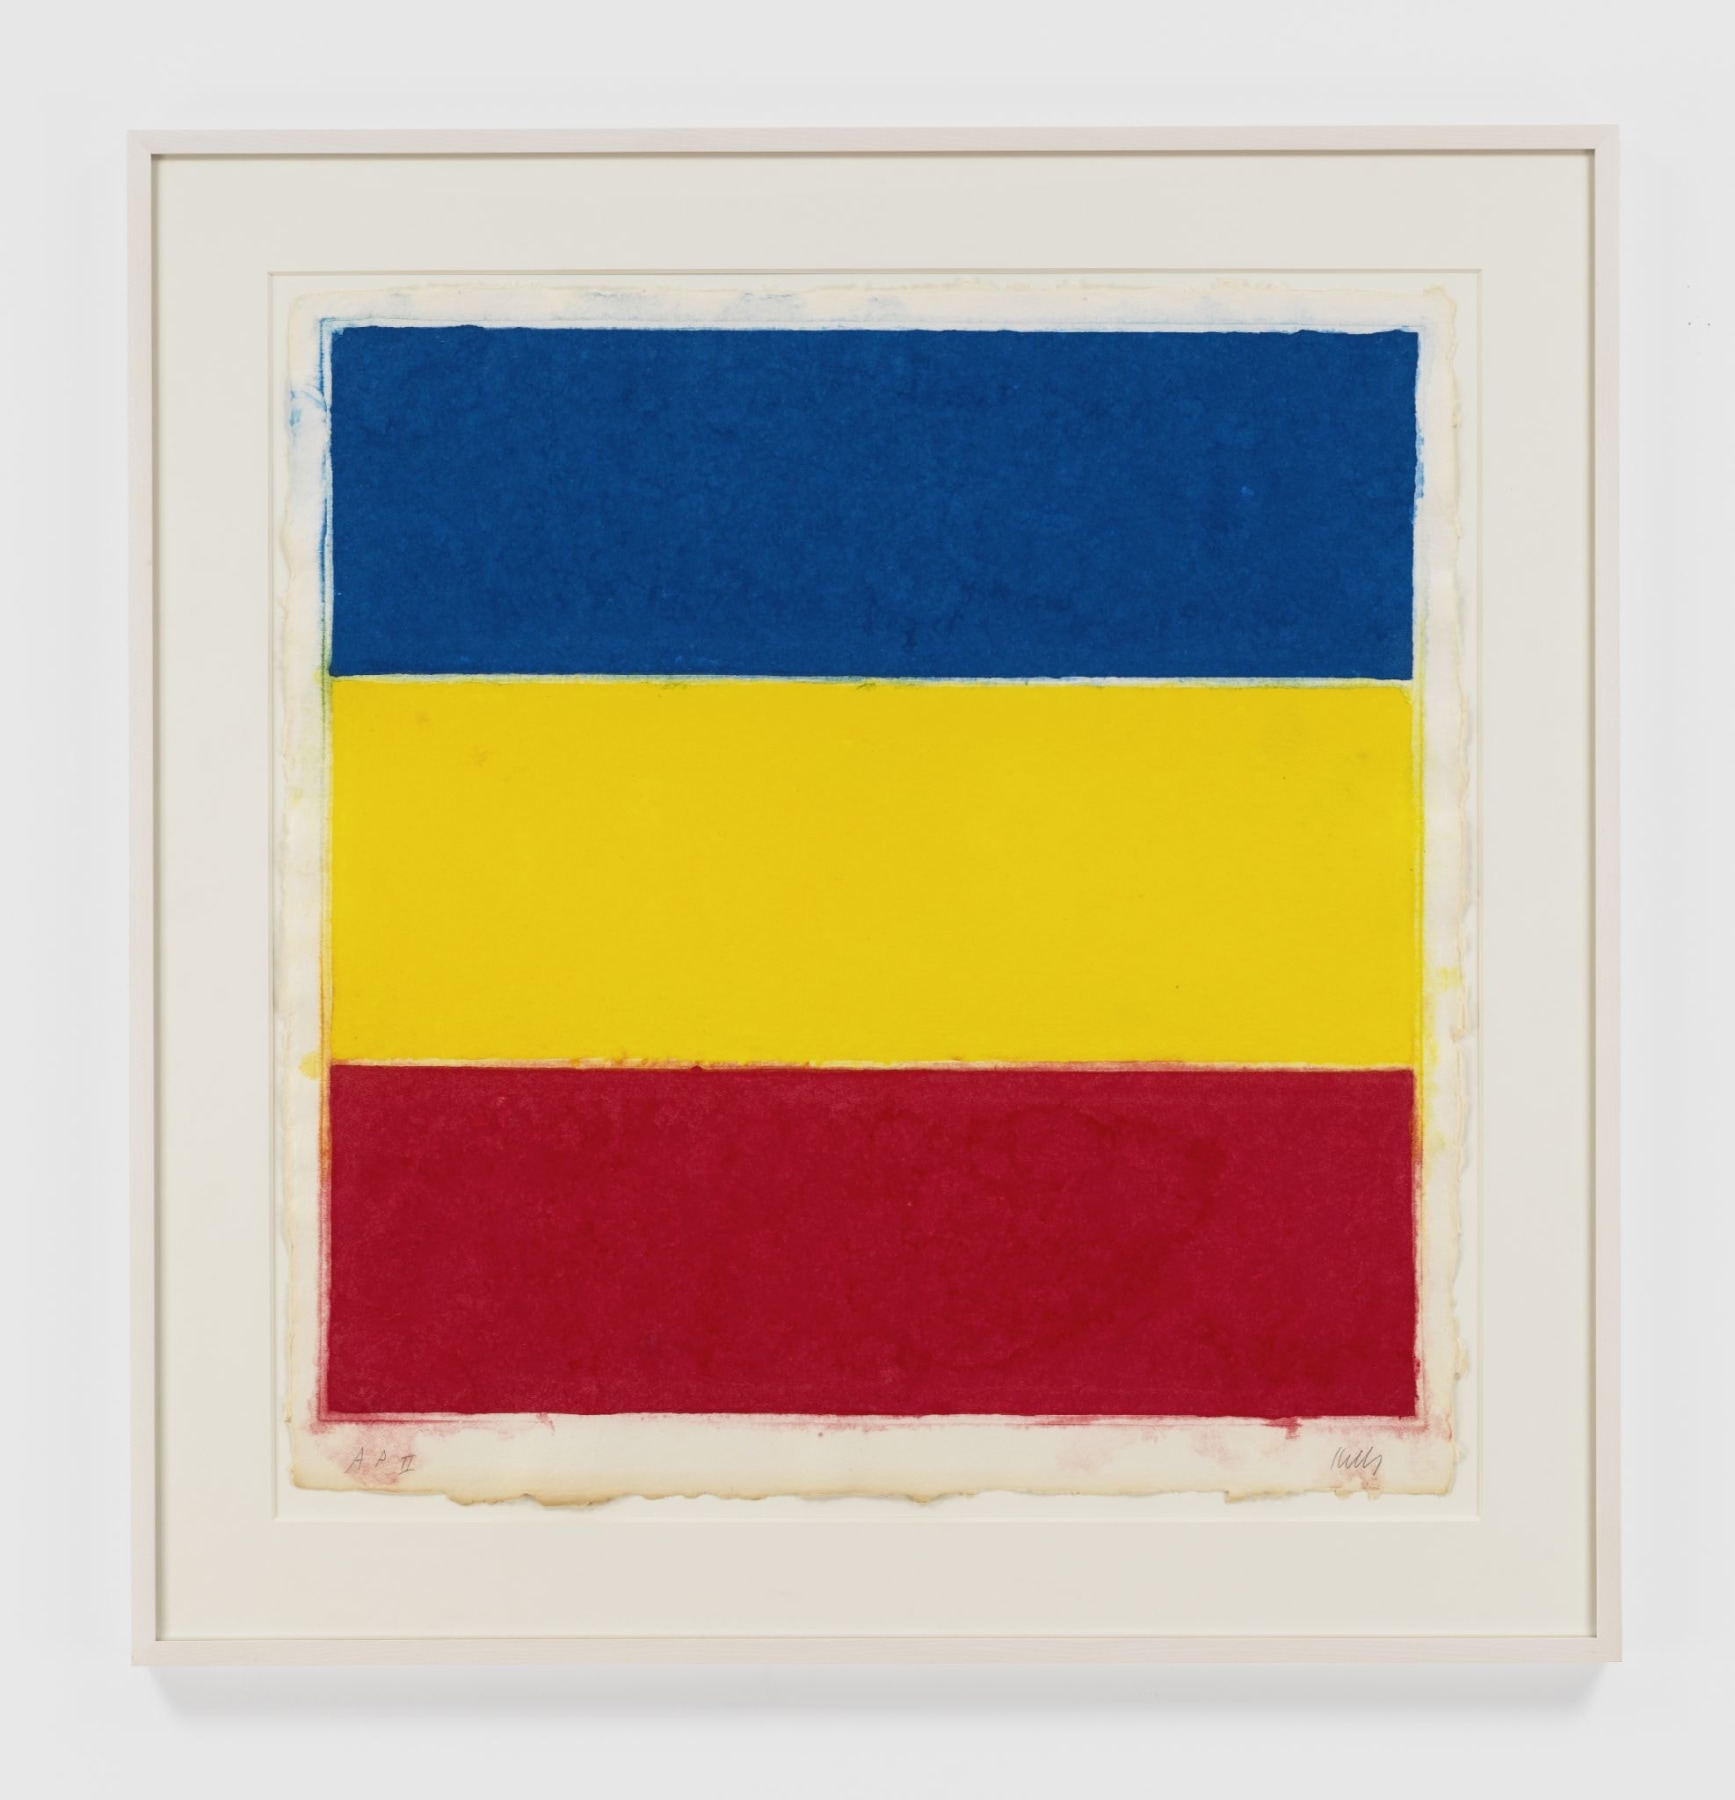 Ellsworth&nbsp;Kelly Colored Paper Image XVI (Blue, Yellow, Red), 1976